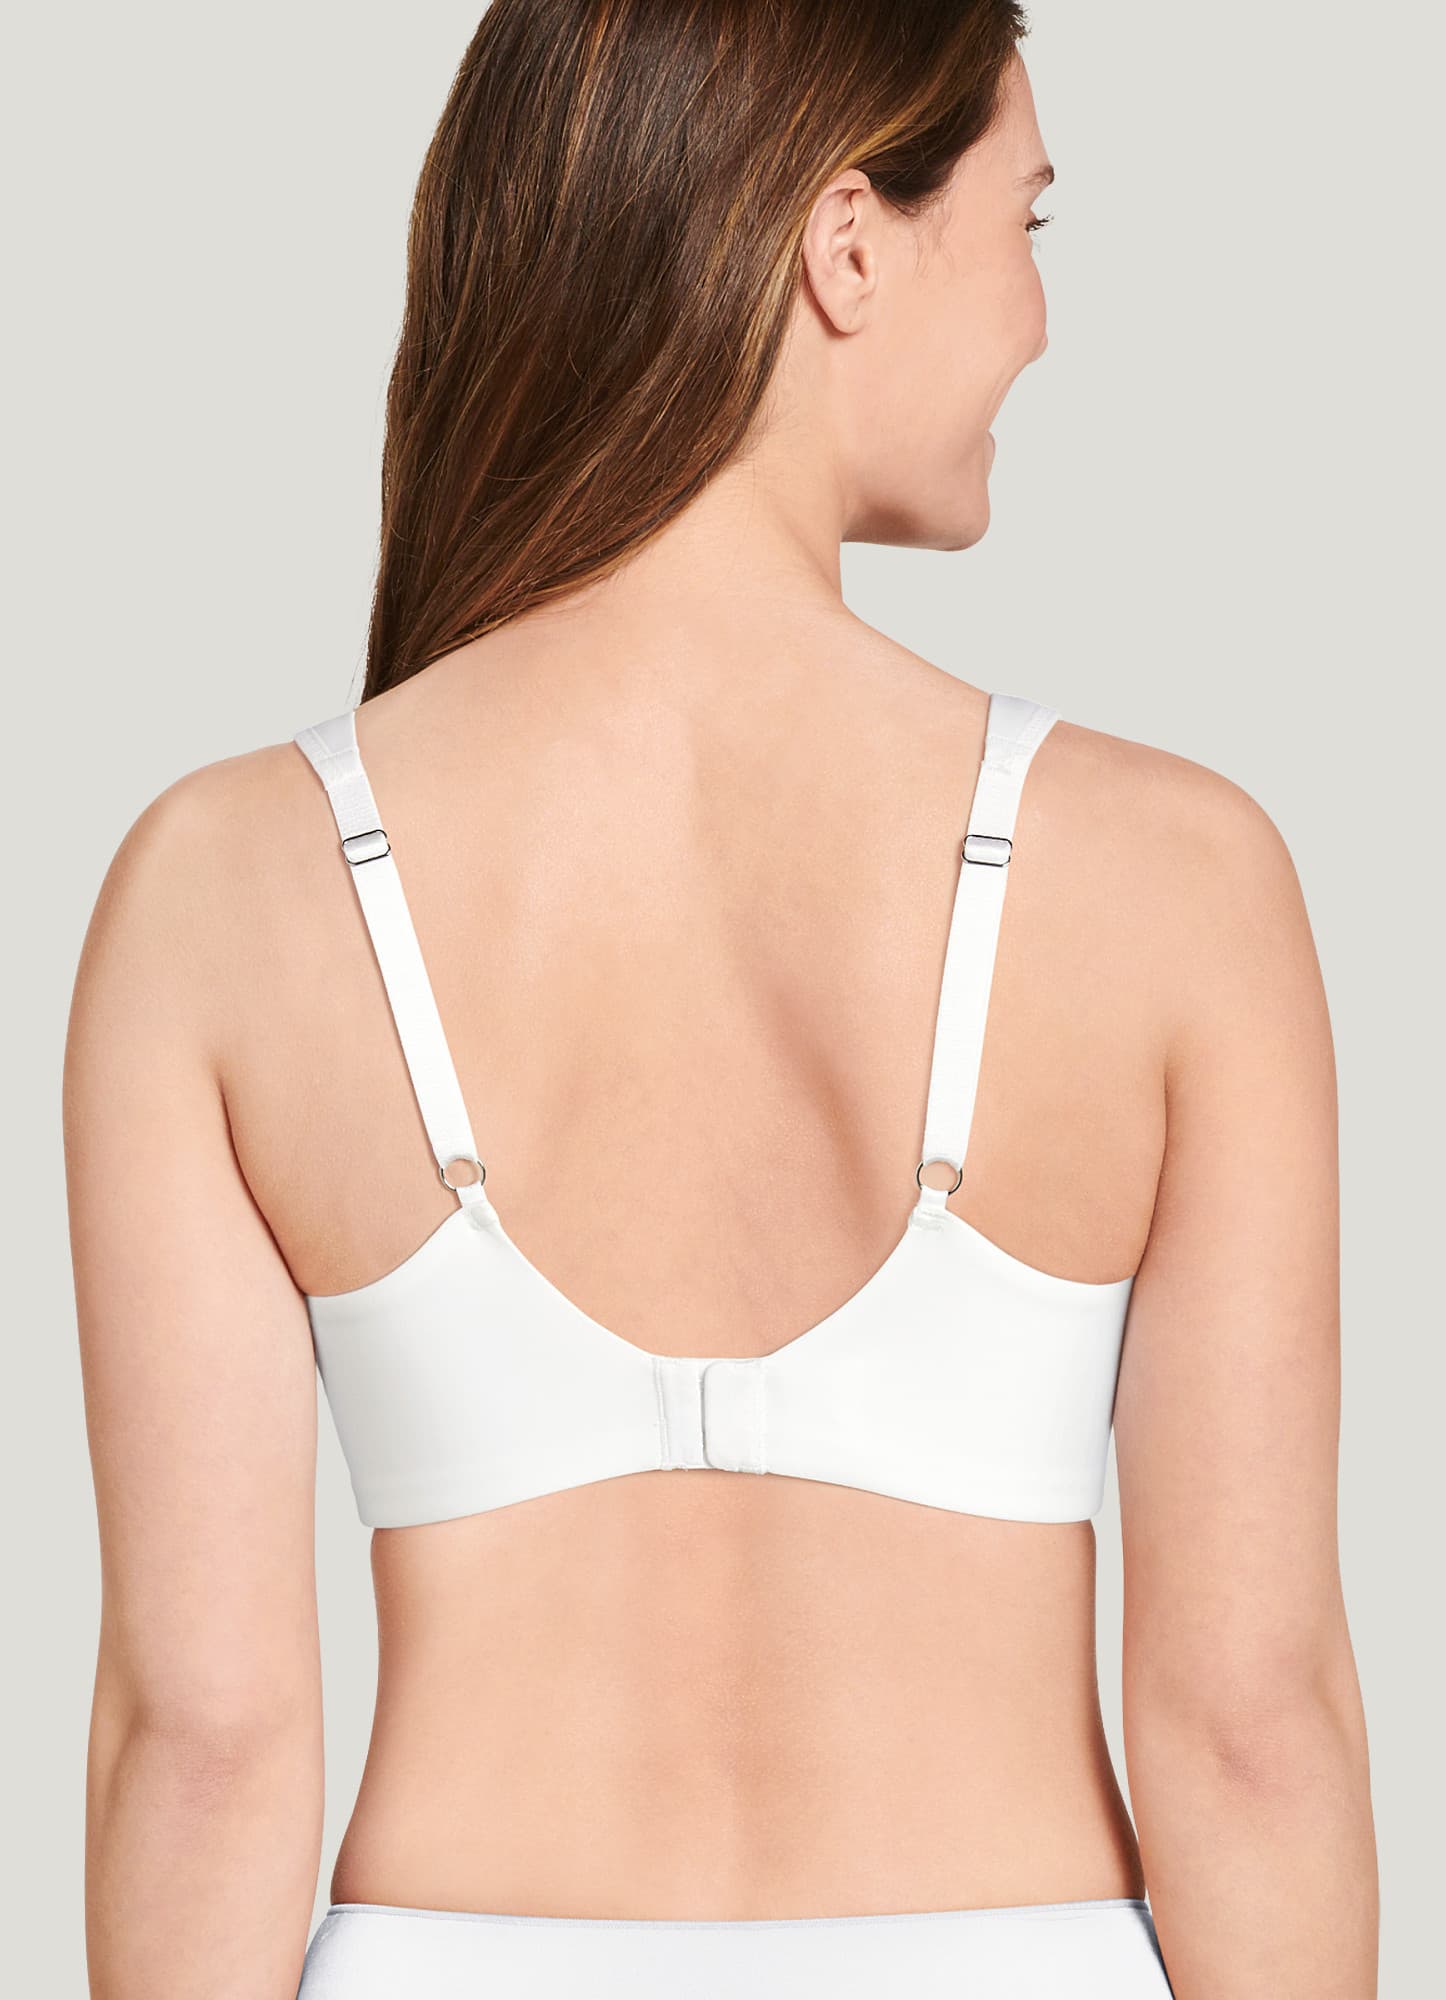 Jockey Womens Double Lined with 3-D Flex Support Bras